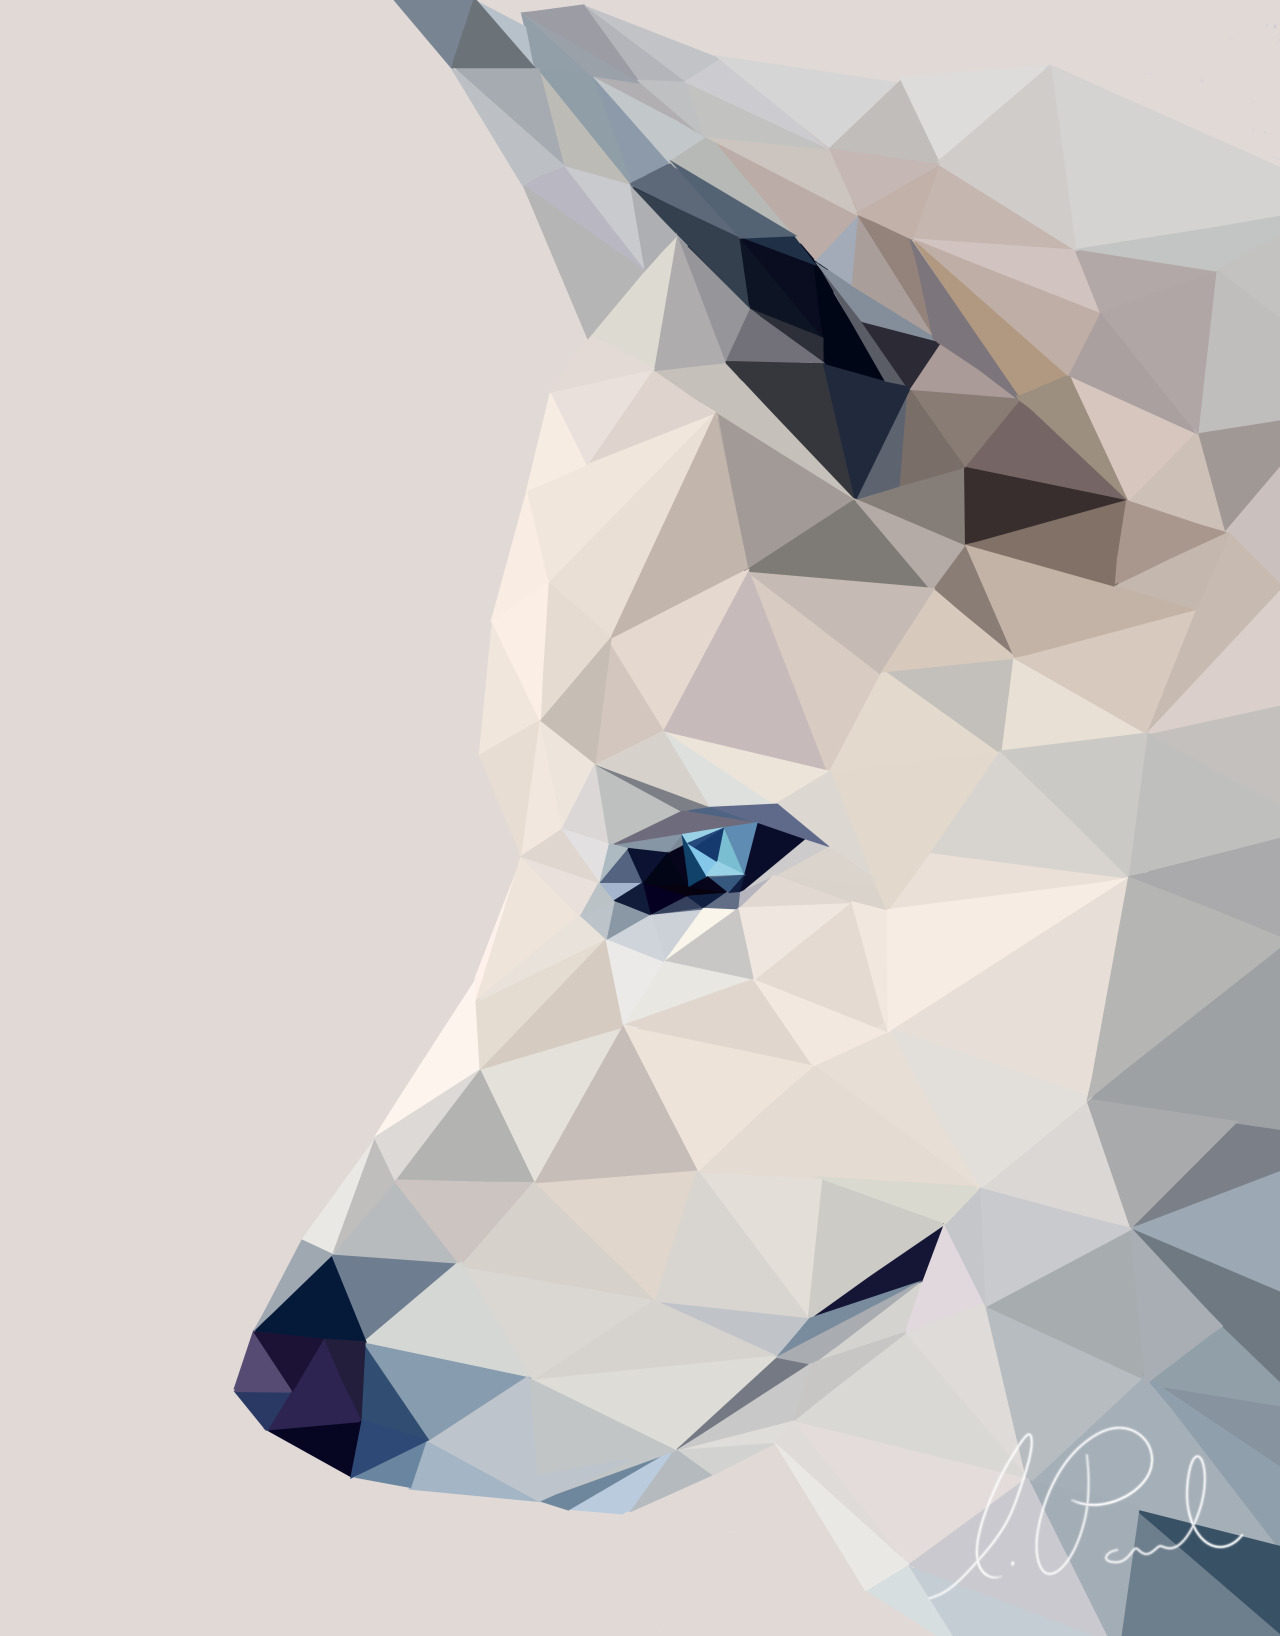 Winter, the Wolf art print by Liviathaine. Available on Society6.